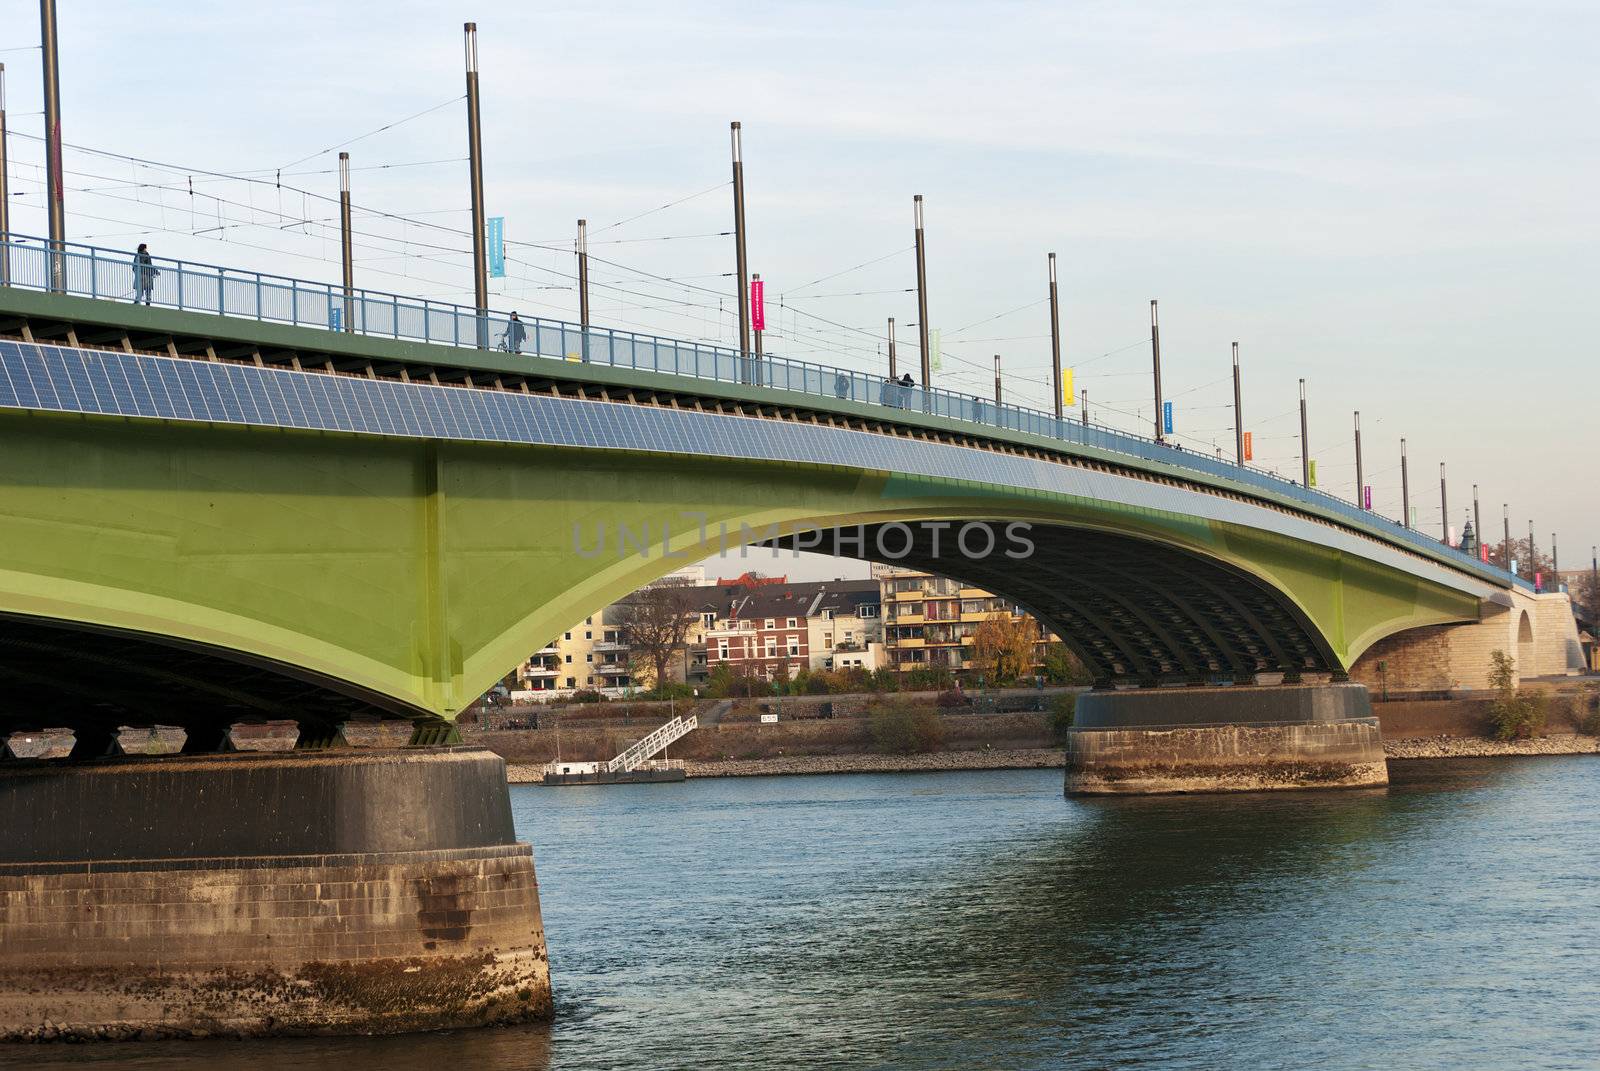 Kennedy Bridge (German: Kennedybr�cke) after the reconstruction, middle of Bonn's three Rhine bridges, connecting  the city center of Bonn with the town center of Beuel